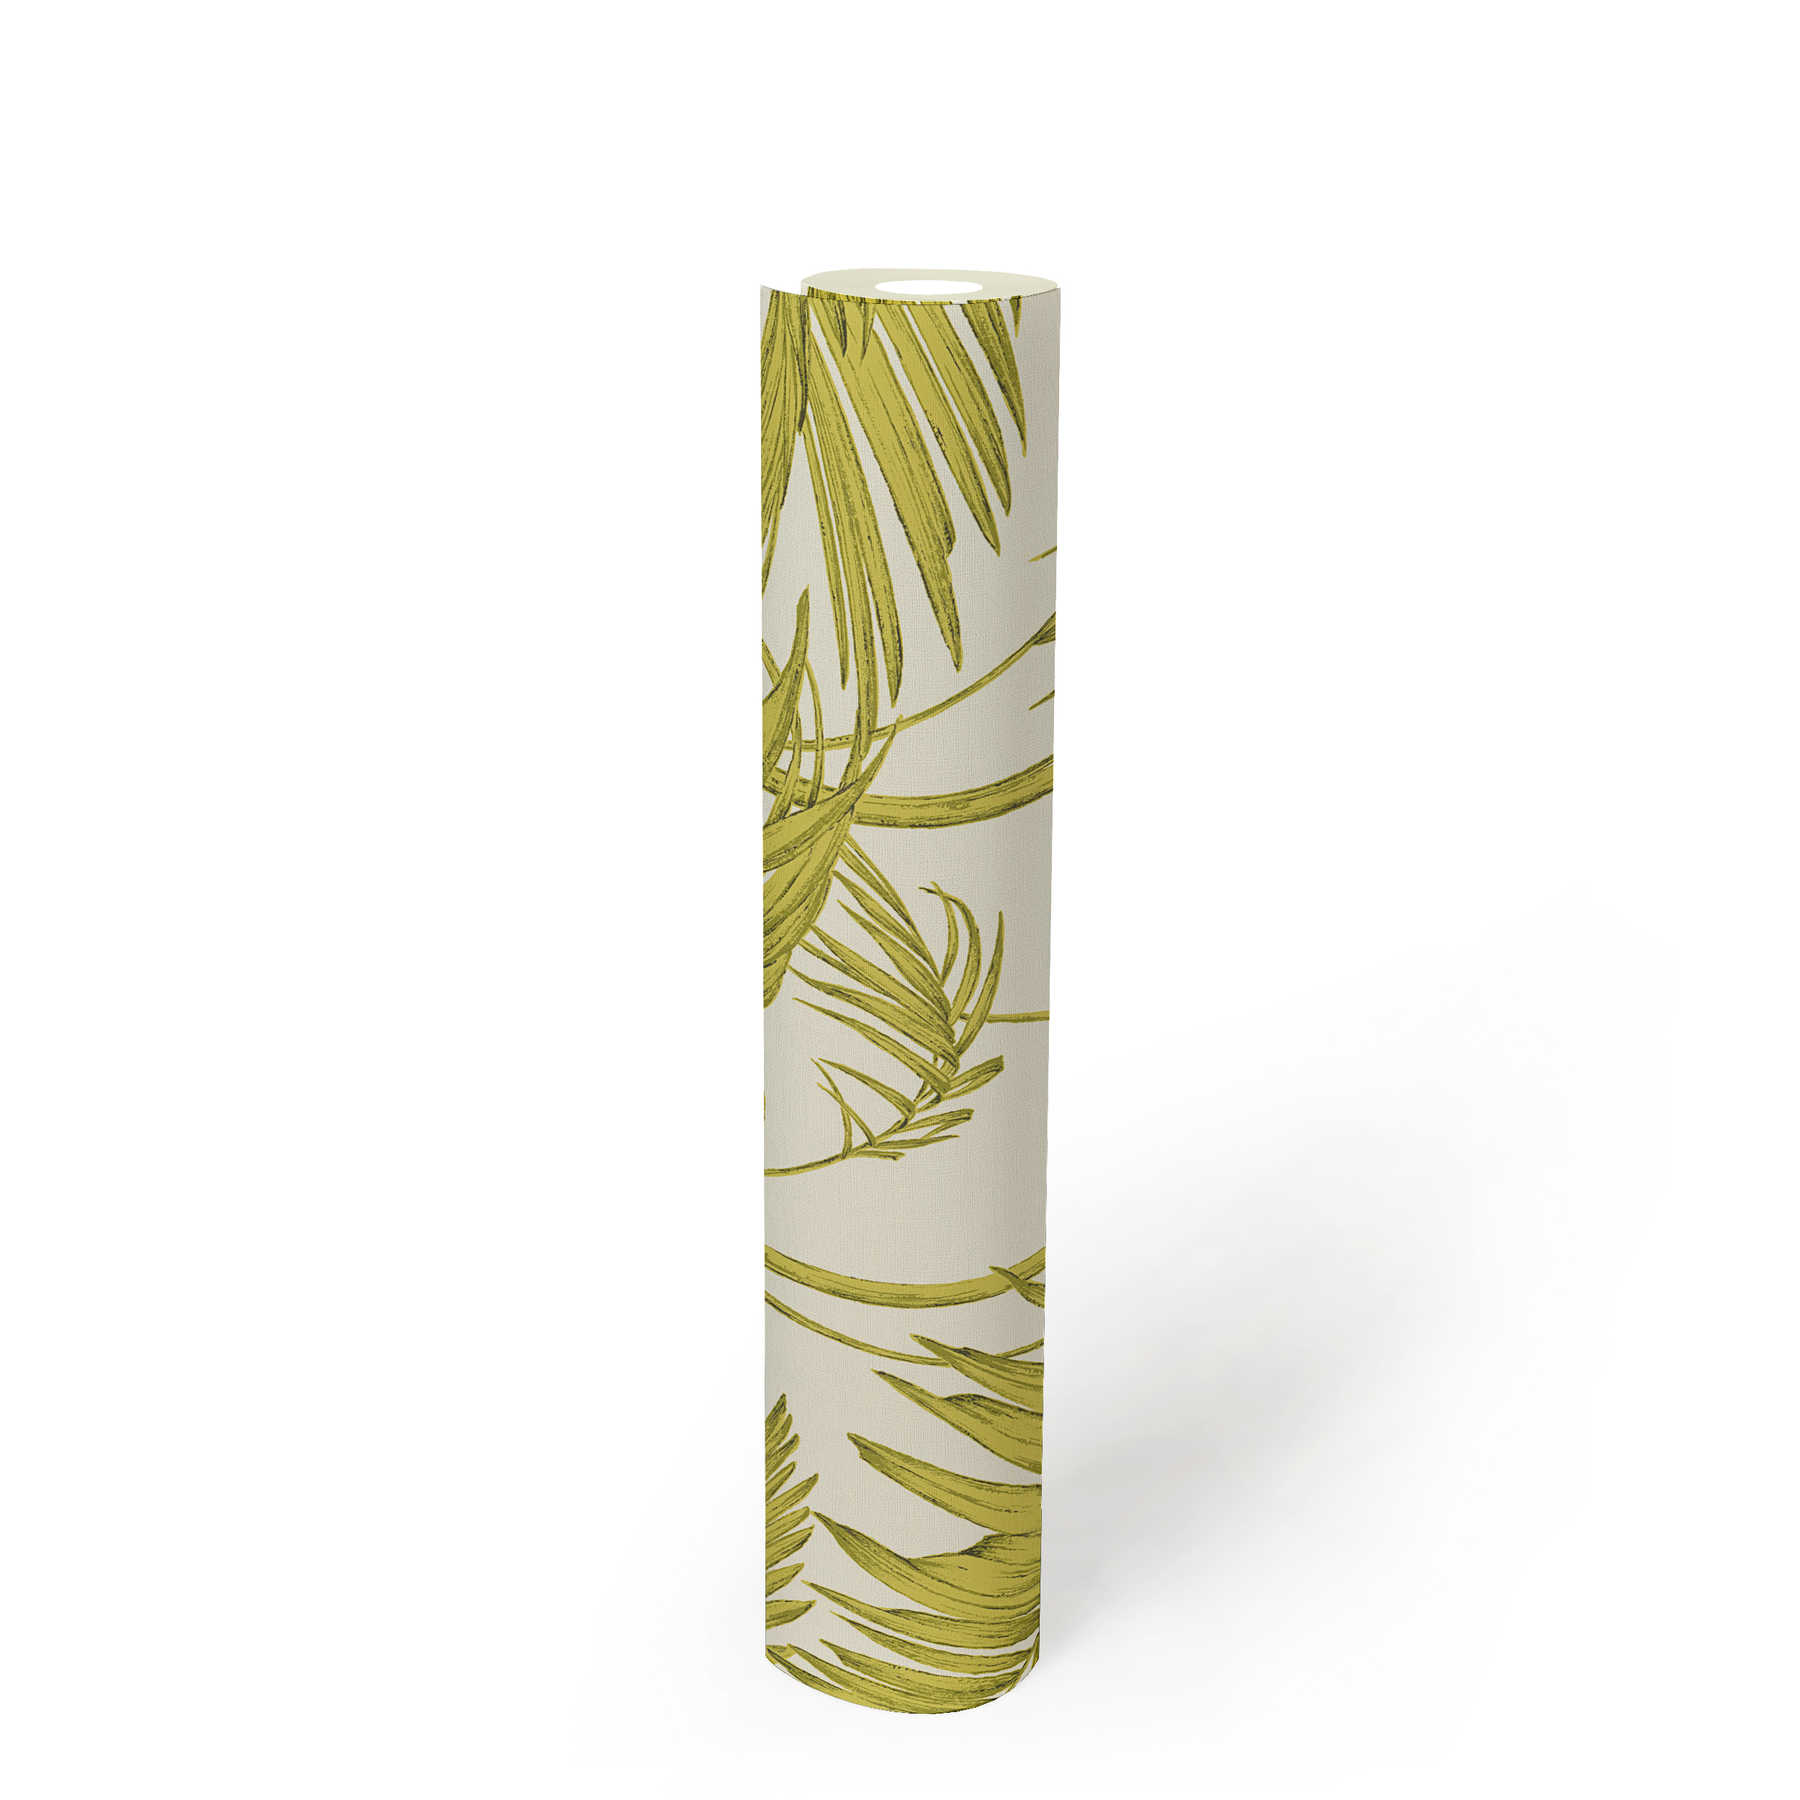             Nature wallpaper palm leaves, bamboo - green, cream
        